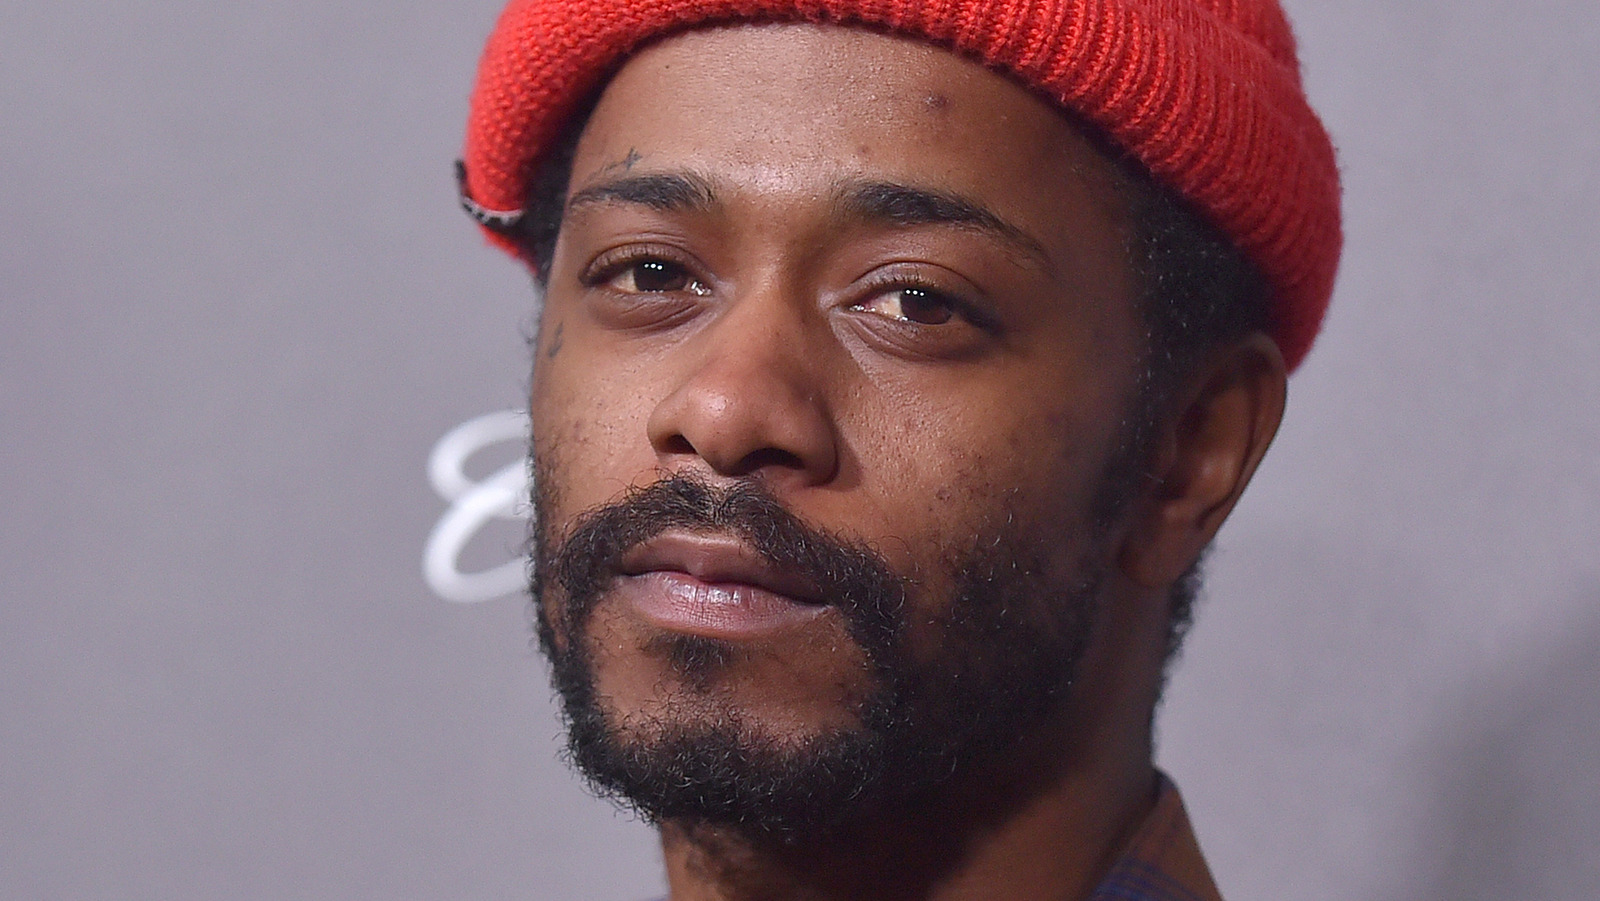 LaKeith Stanfield: How Much Is The Famous Actor Worth?